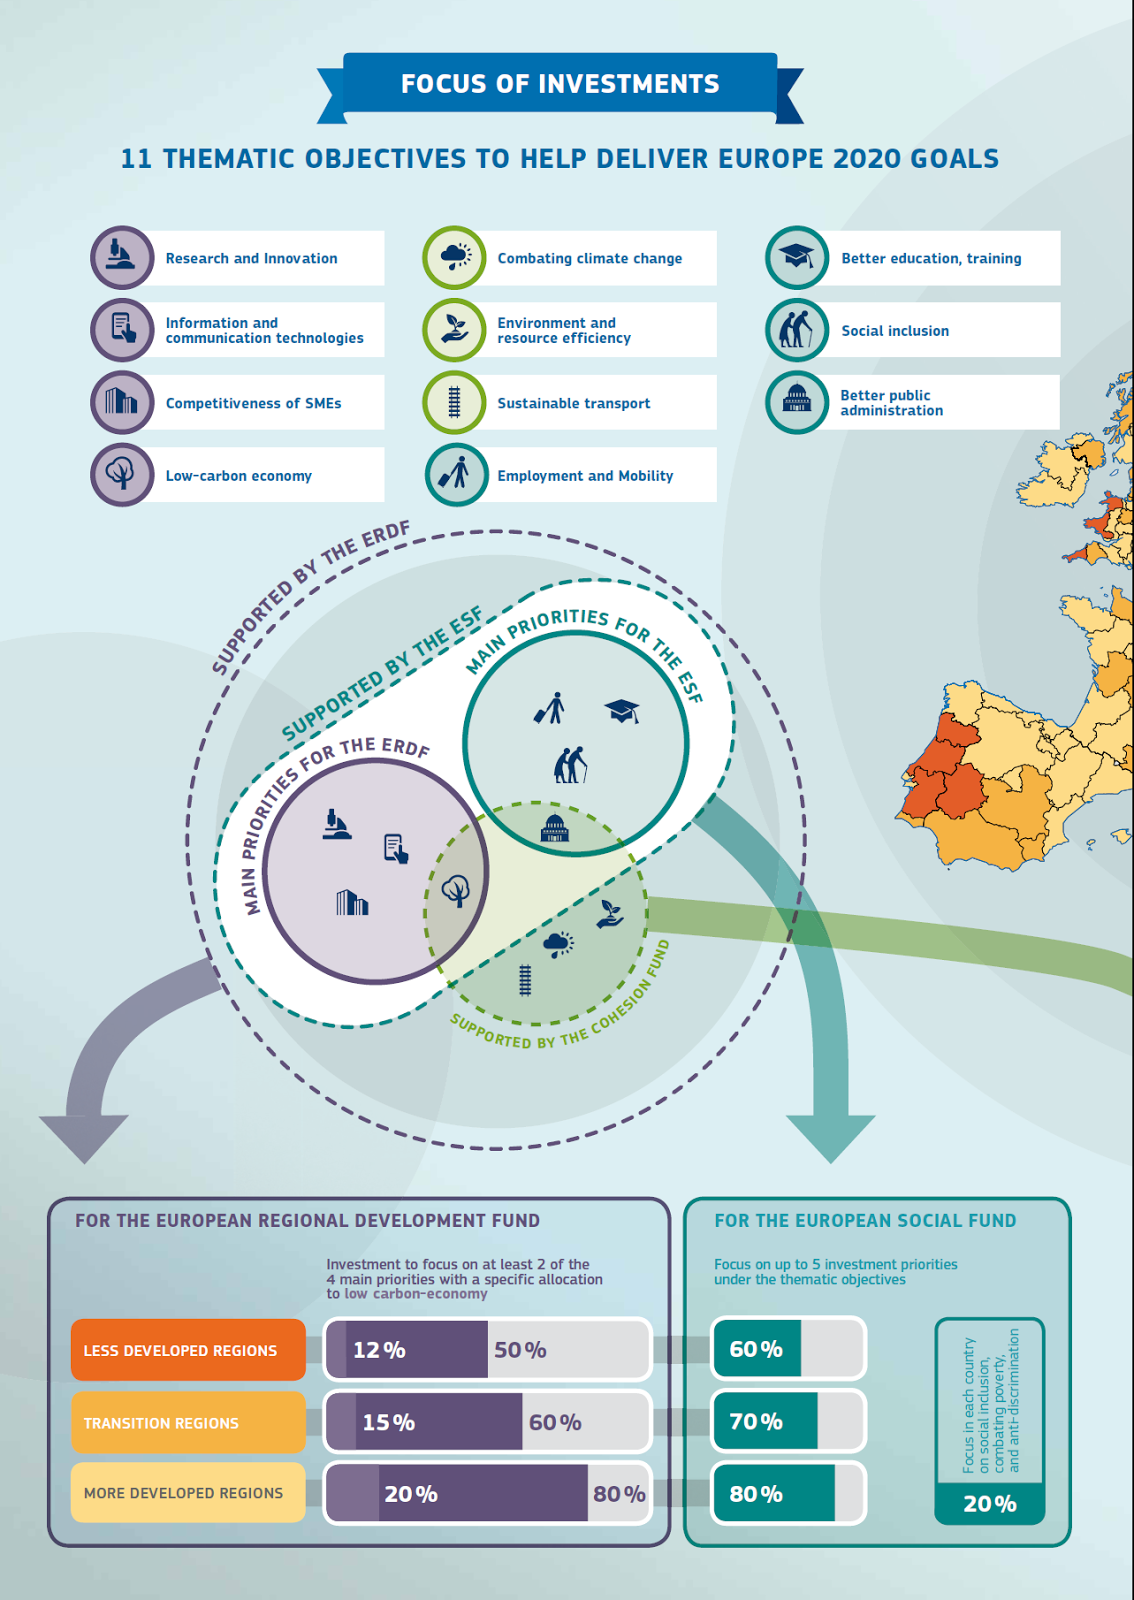 Cohesion policy 2014-2020: 11 THEMATIC OBJECTIVES TO HELP DELIVER EUROPE 2020 GOALS